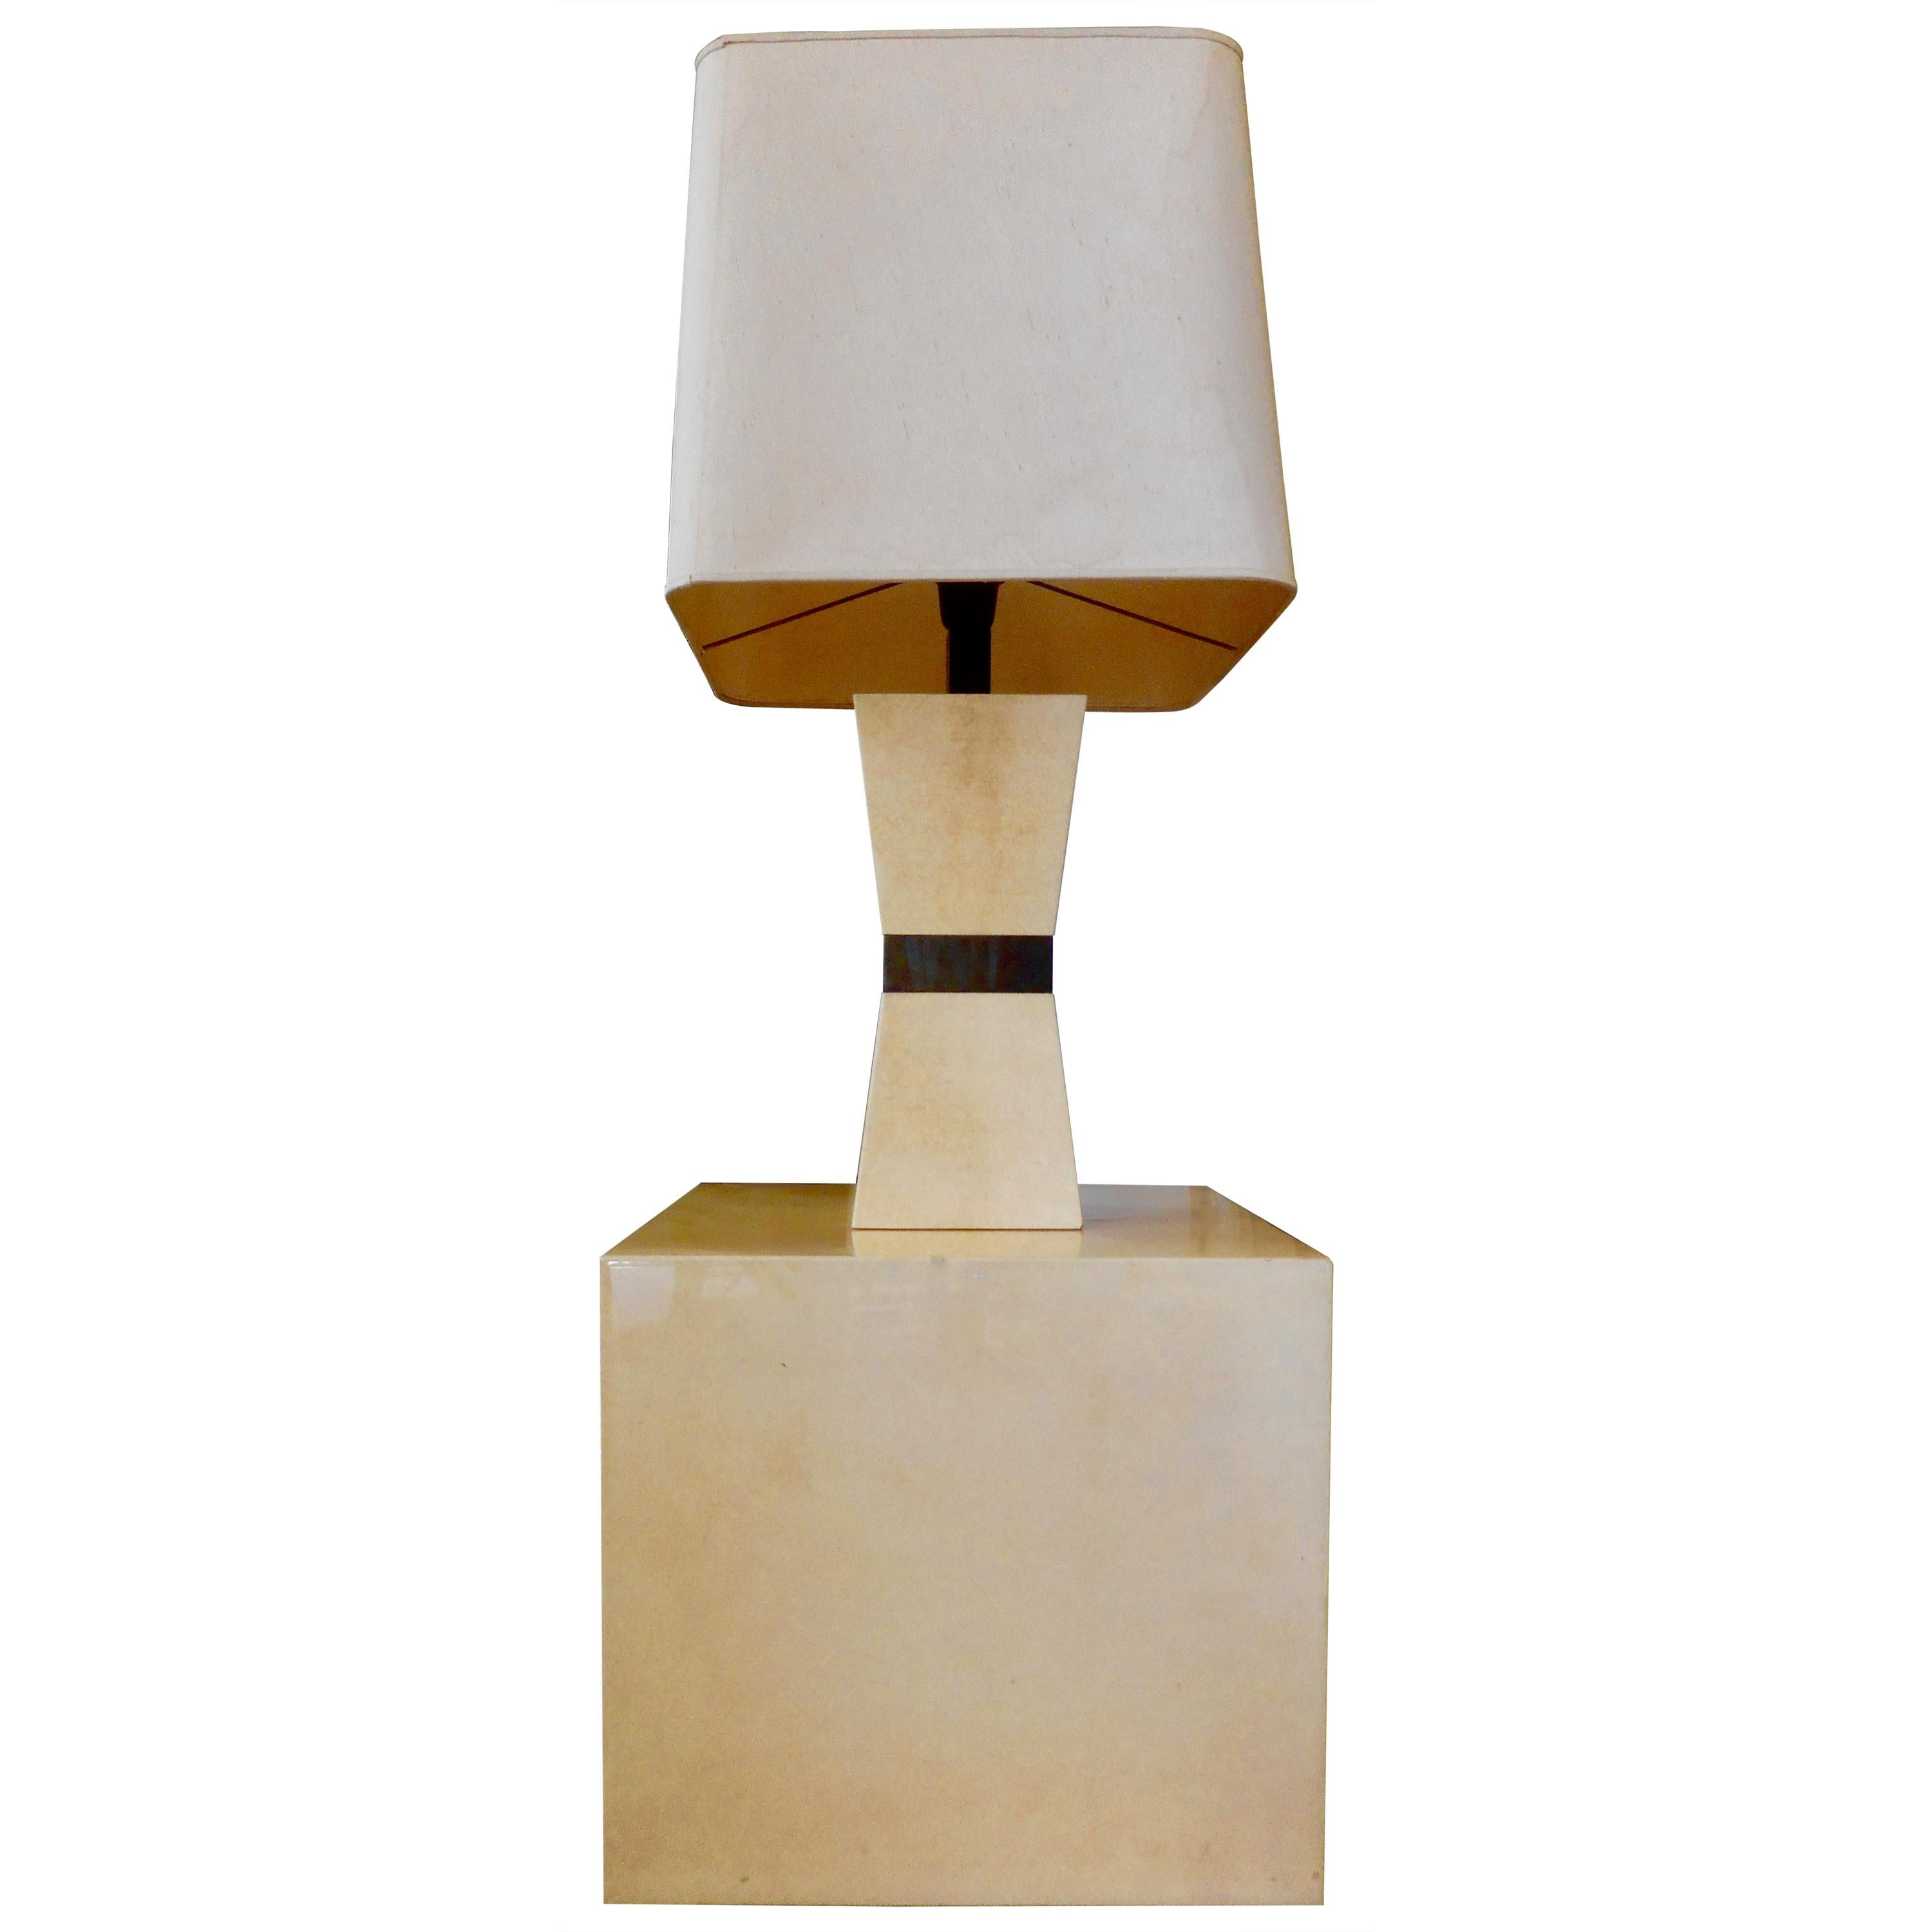 Goatskin Covered Lamp and Pedestal by Aldo Tura, Italy, 1970